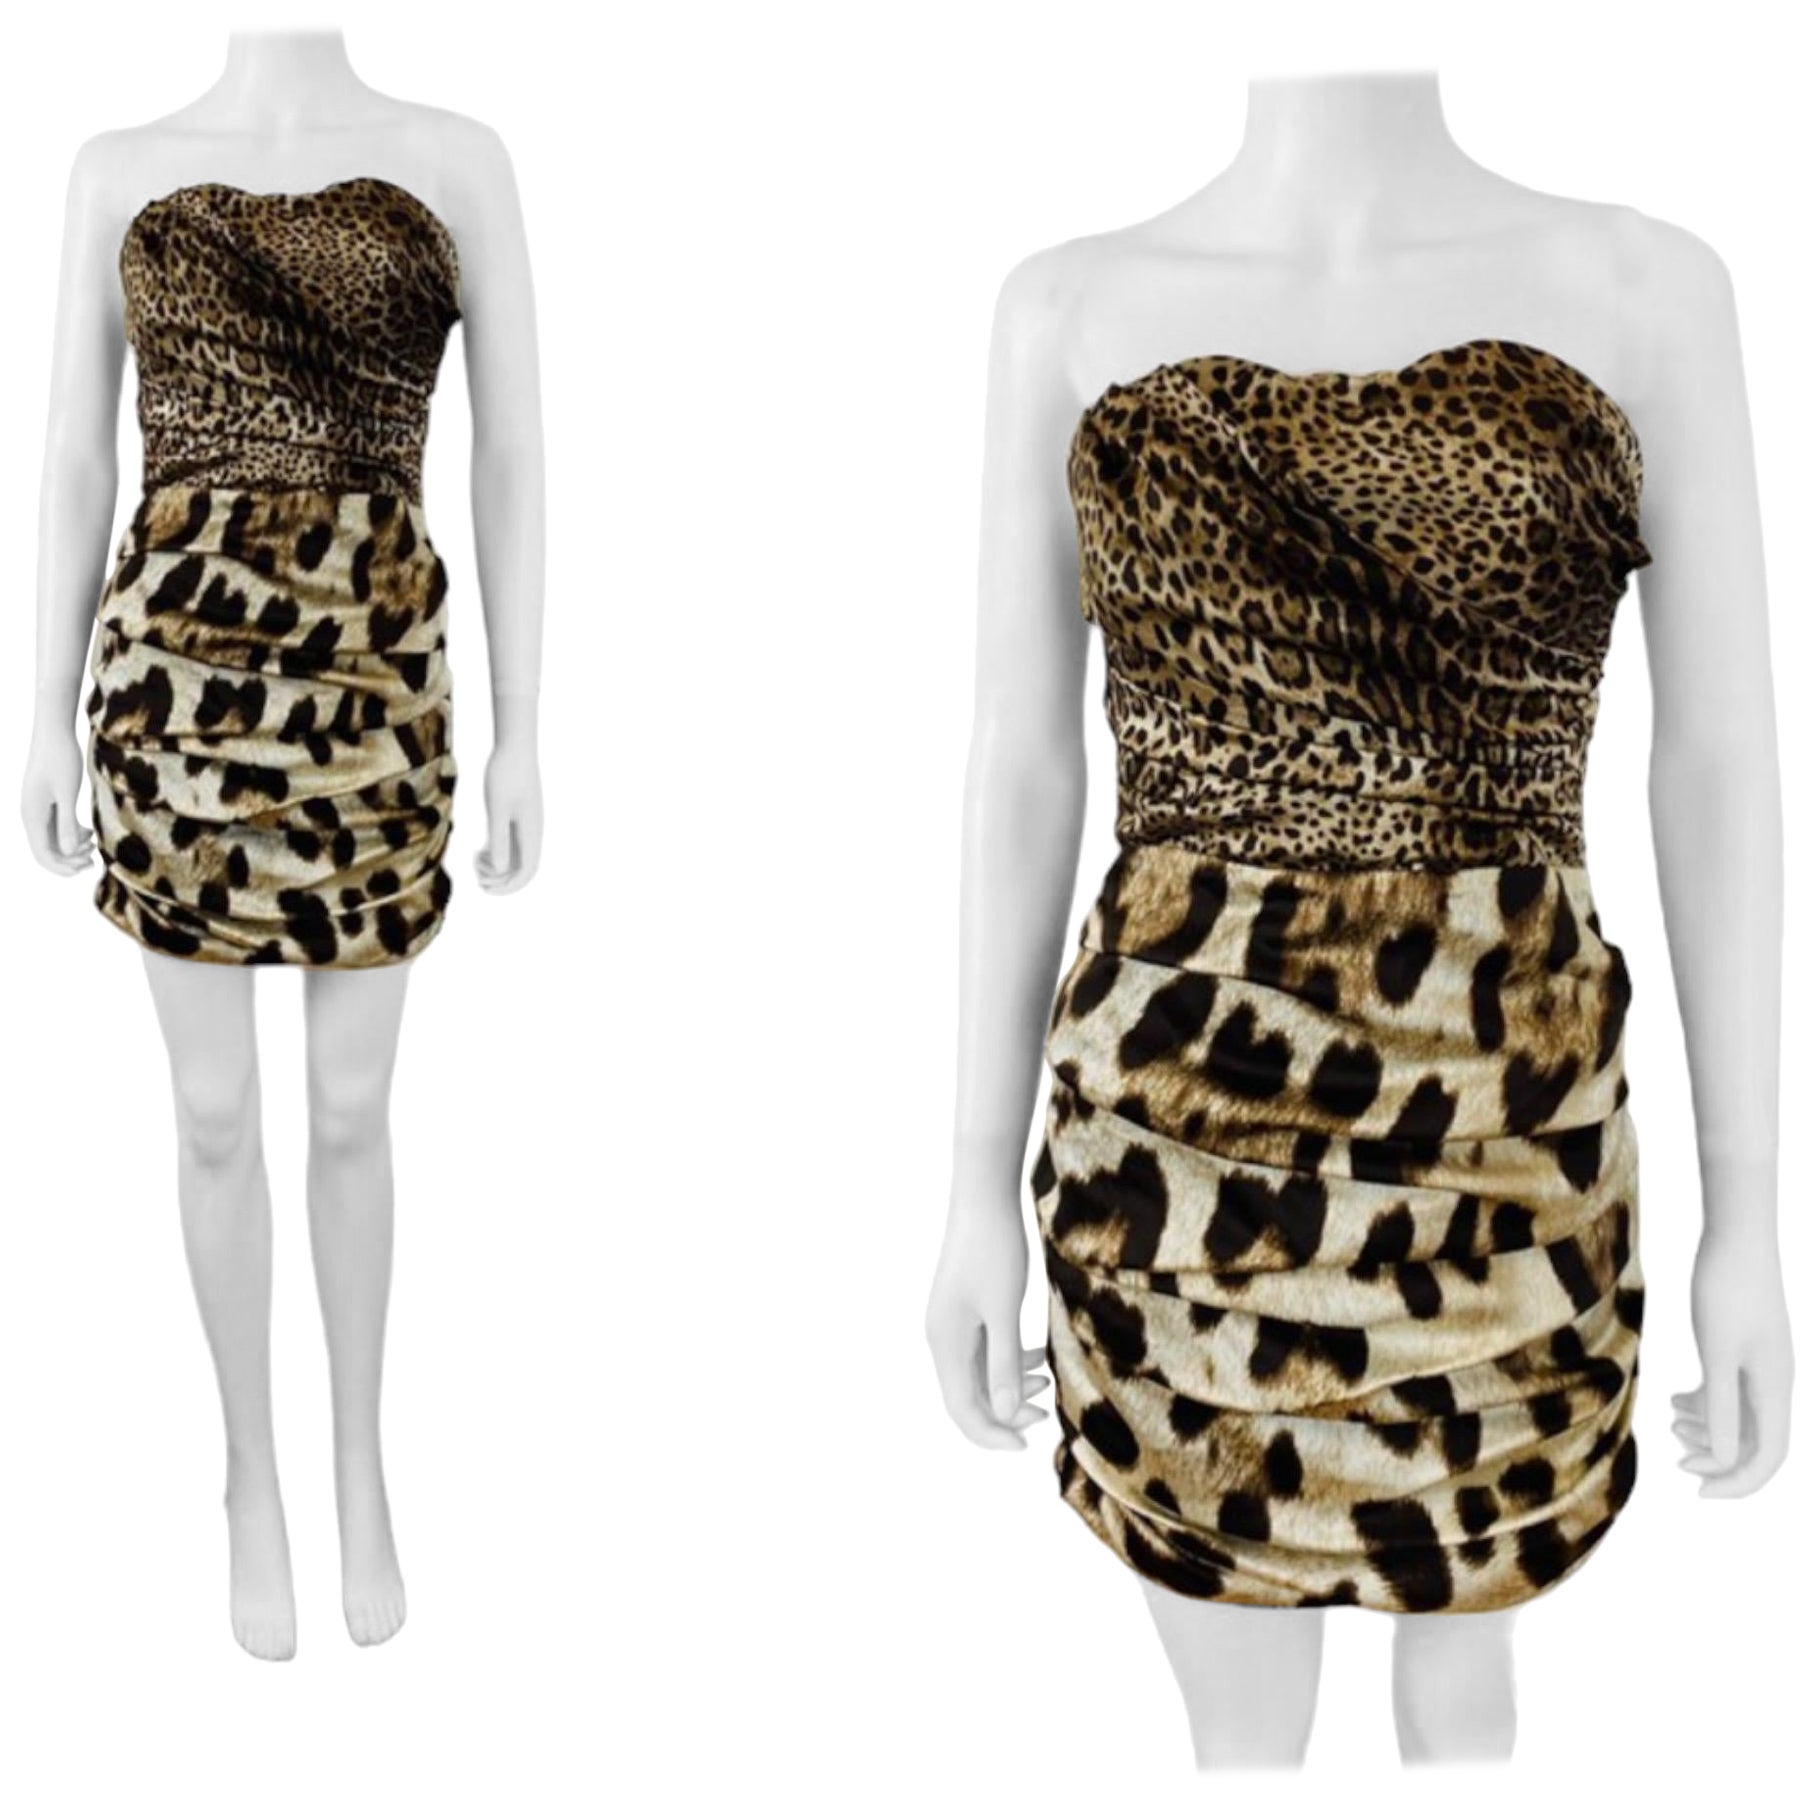 Beautiful Vintage Y2K Dolce & Gabbana Dress
Fitted bodice with ruched gathered details + hidden wired bras/bust cups
Boning on sides of bodice
Contrasting leopard print fabrics with smaller leopard print on top + oversized leopard print on the